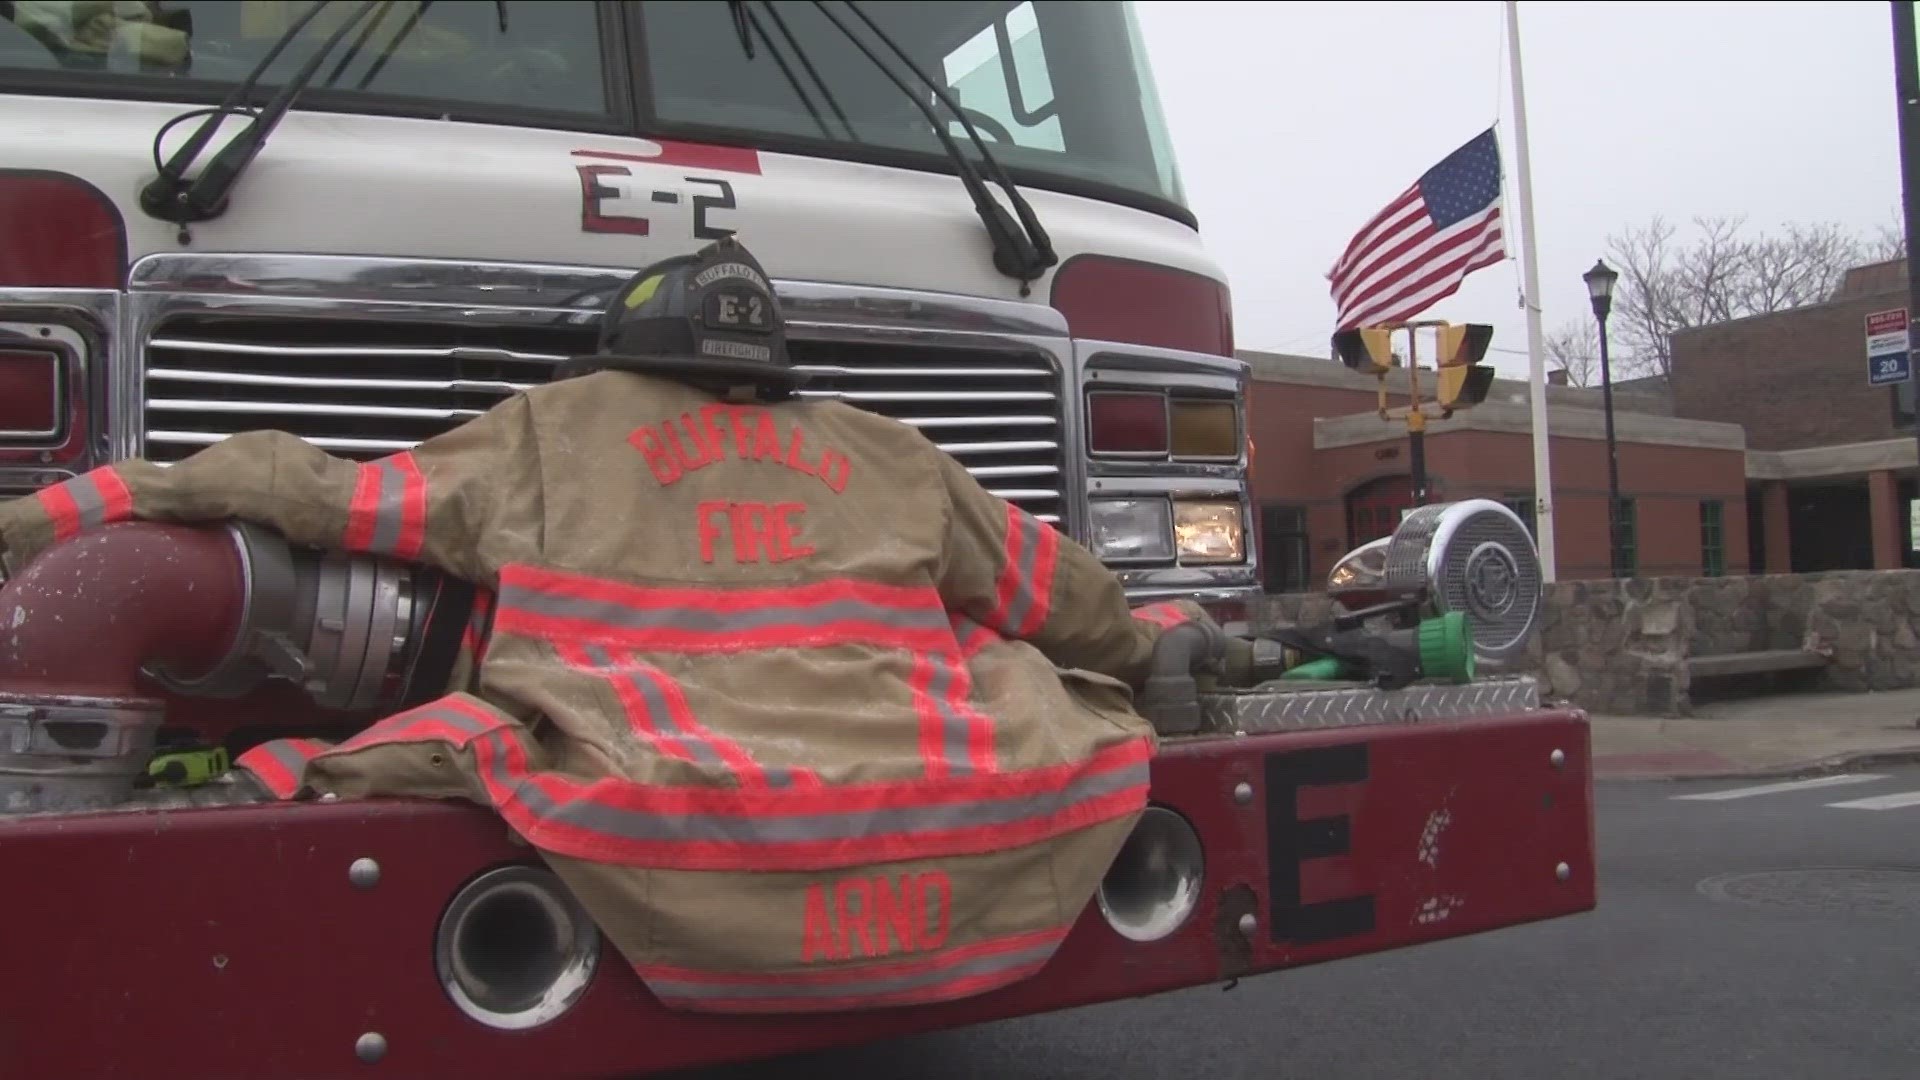 The procession took the fallen firefighter past his fire hall one last time.